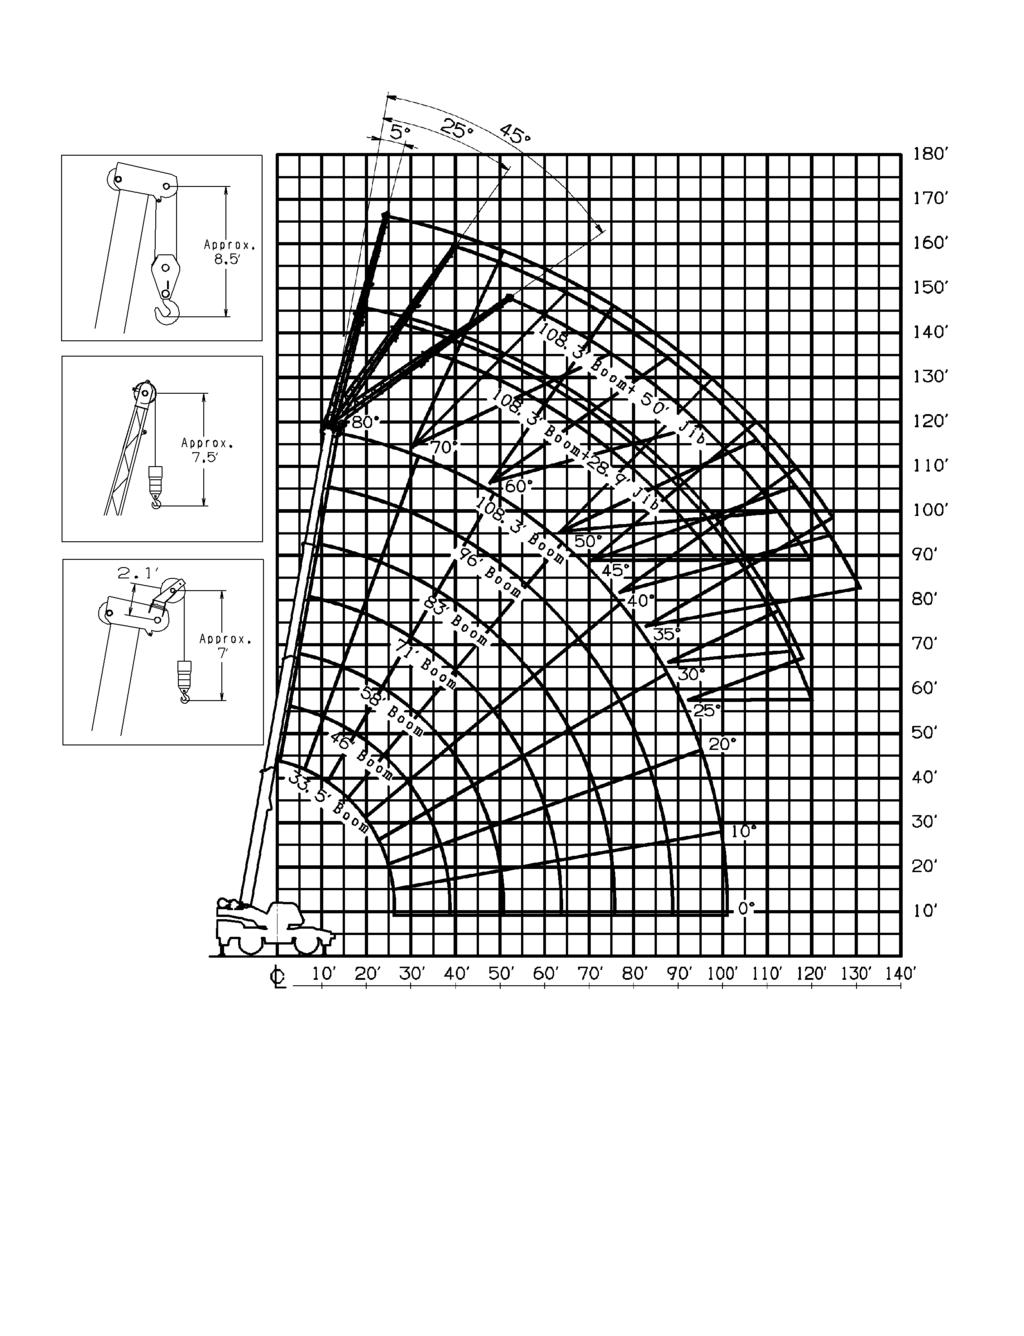 TR-450XL-4 WORKING RANGE CHART Lifting Height in Feet Axis of Rotation Load radius from Axis of Rotation in Feet NOTE: Boom and jib geometry shown are for unloaded